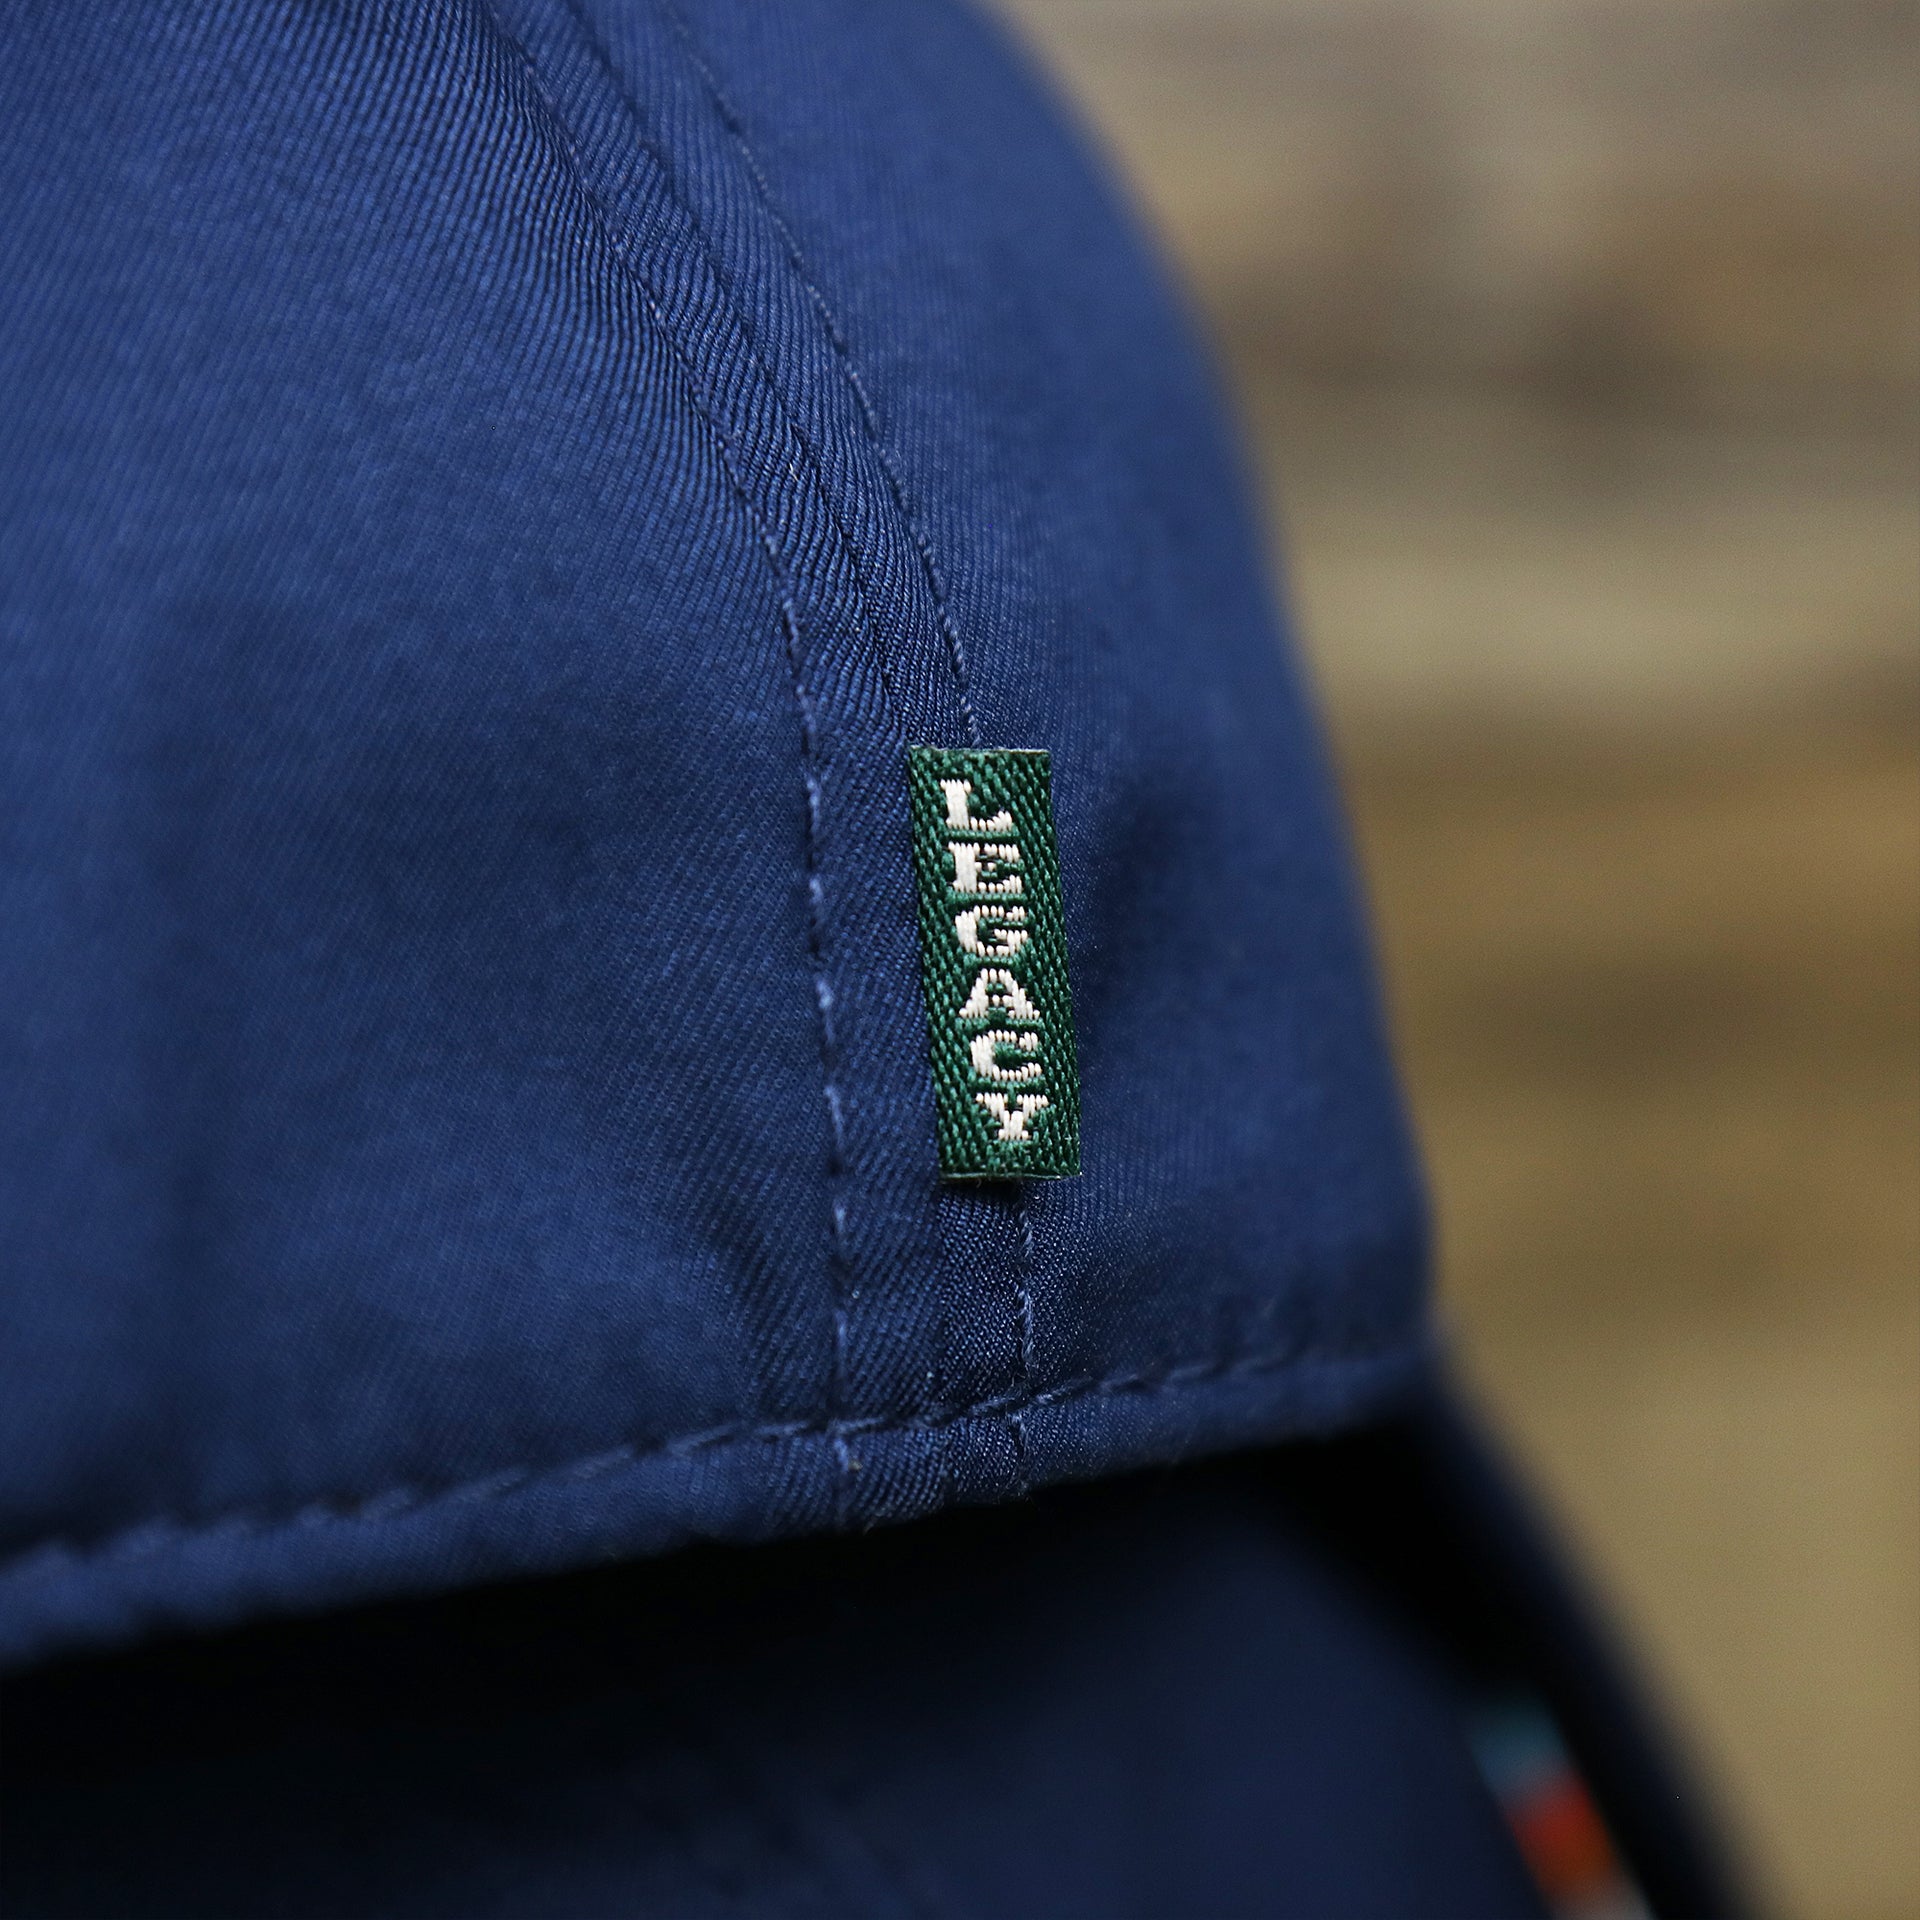 The Green legacy Tag on the New Jersey High Point PVC Ocean City Rubber Patch Cool Fit Adjustable Dad Hat | Navy Blue Dad Hat